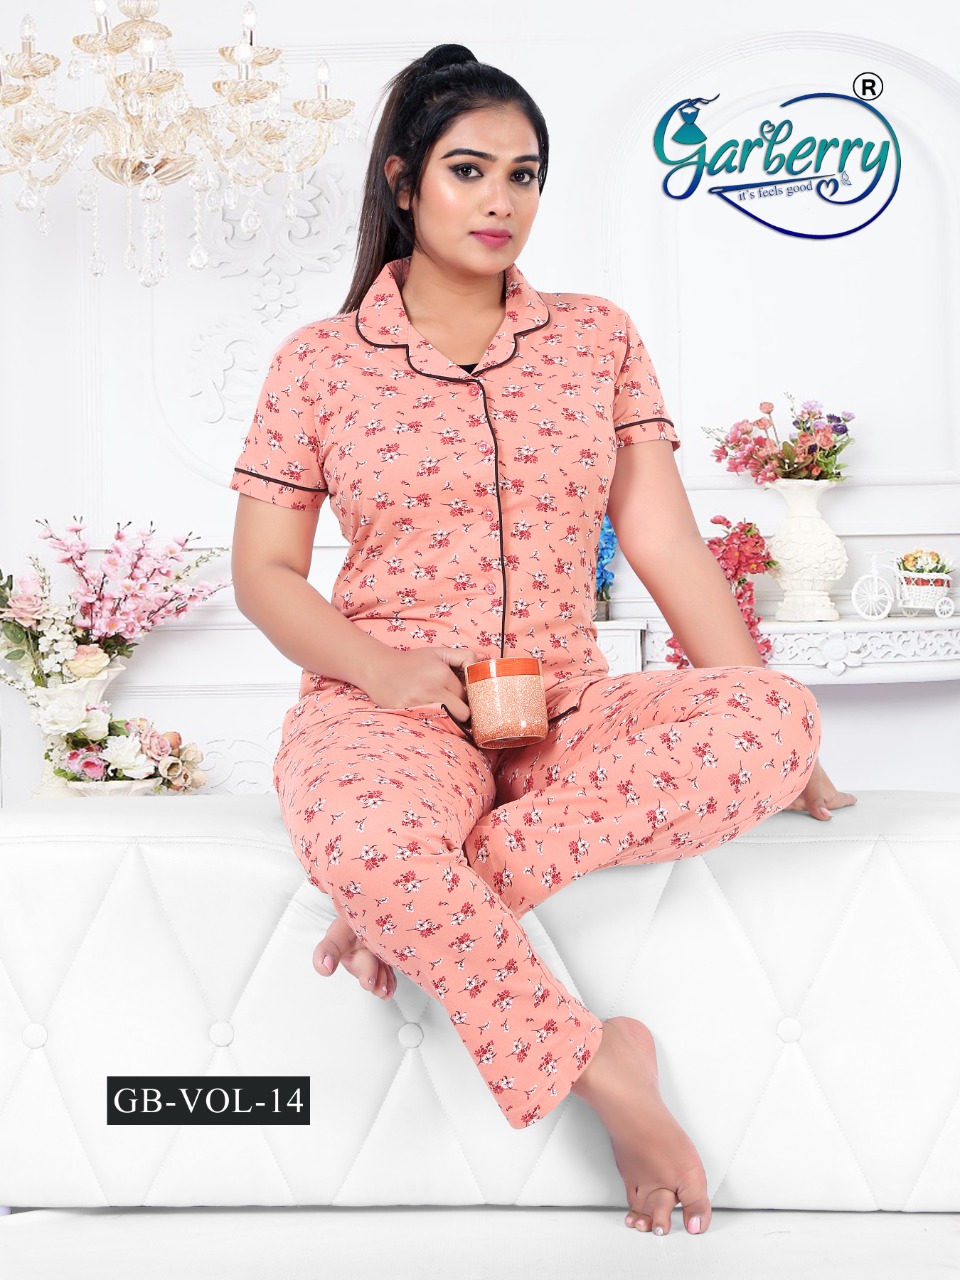 Garberry Night Dress Vol-14 Cotton Stretchable Lycra Printed Night Suit